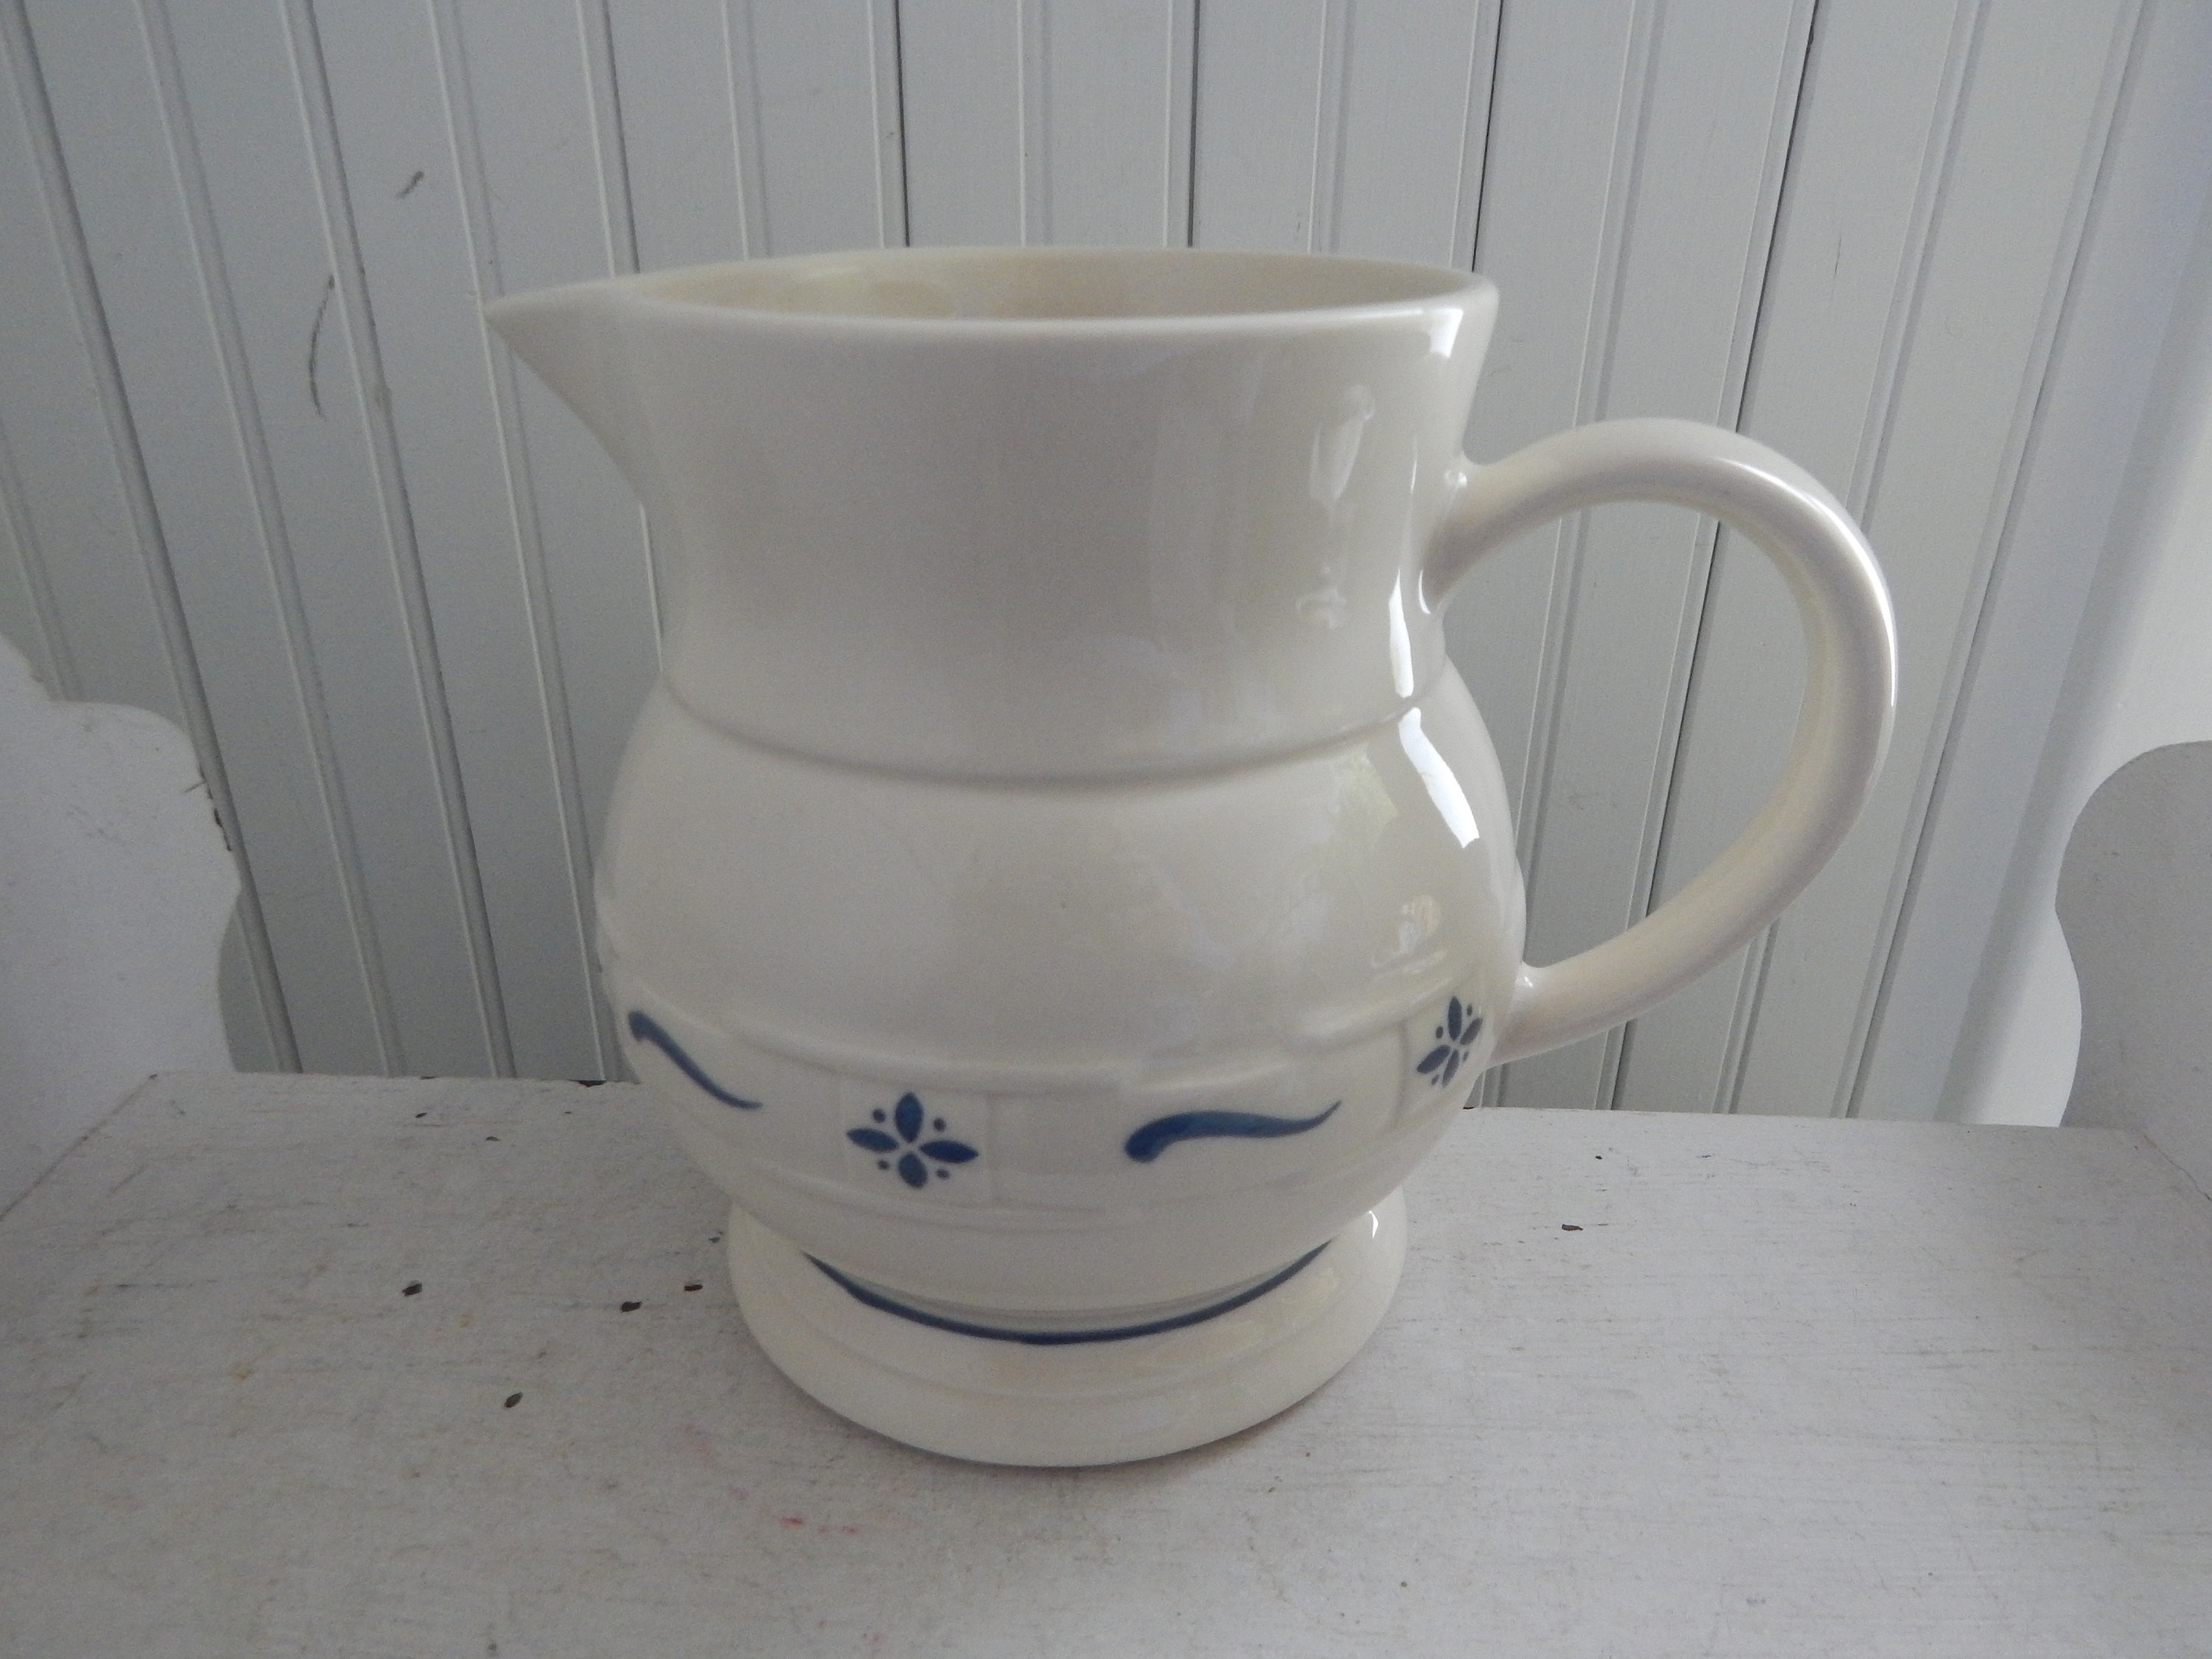 Longaberger Pottery Blue Woven Traditions Small Pitcher Made in USA 1991 6